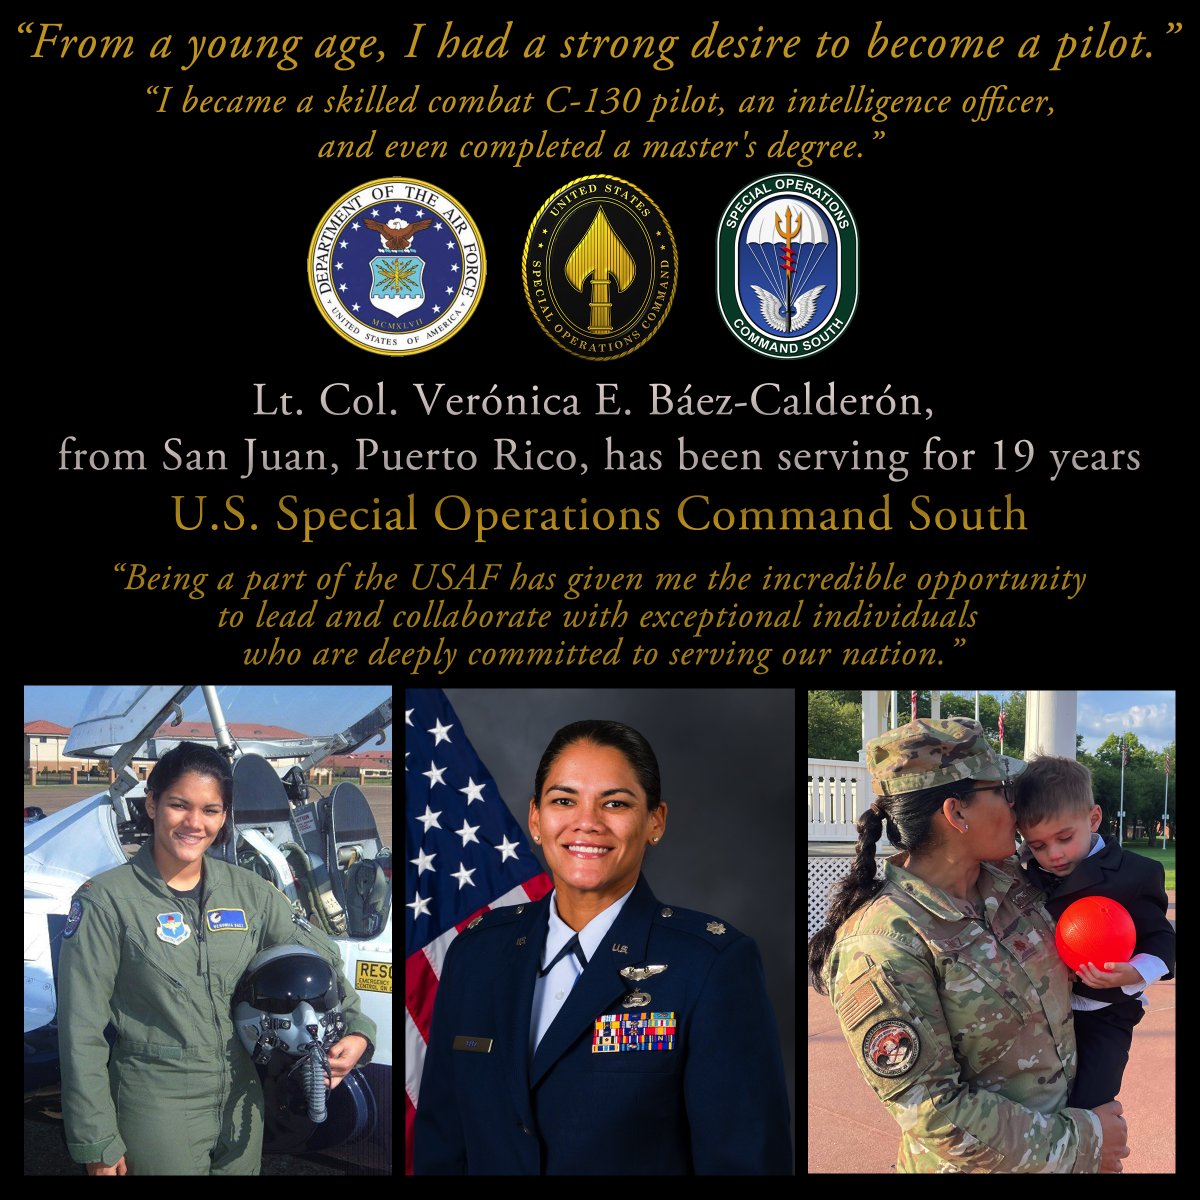 #CallToService with @usairforce Lt. Col. Verónica E. Báez-Calderón, from San Juan, Puerto Rico and assigned to @SOCSOUTH. 'From a young age, I had a strong desire to become a pilot... I remember telling my uncle about my dream when I was just 5 years old.' #WhyIServe #People